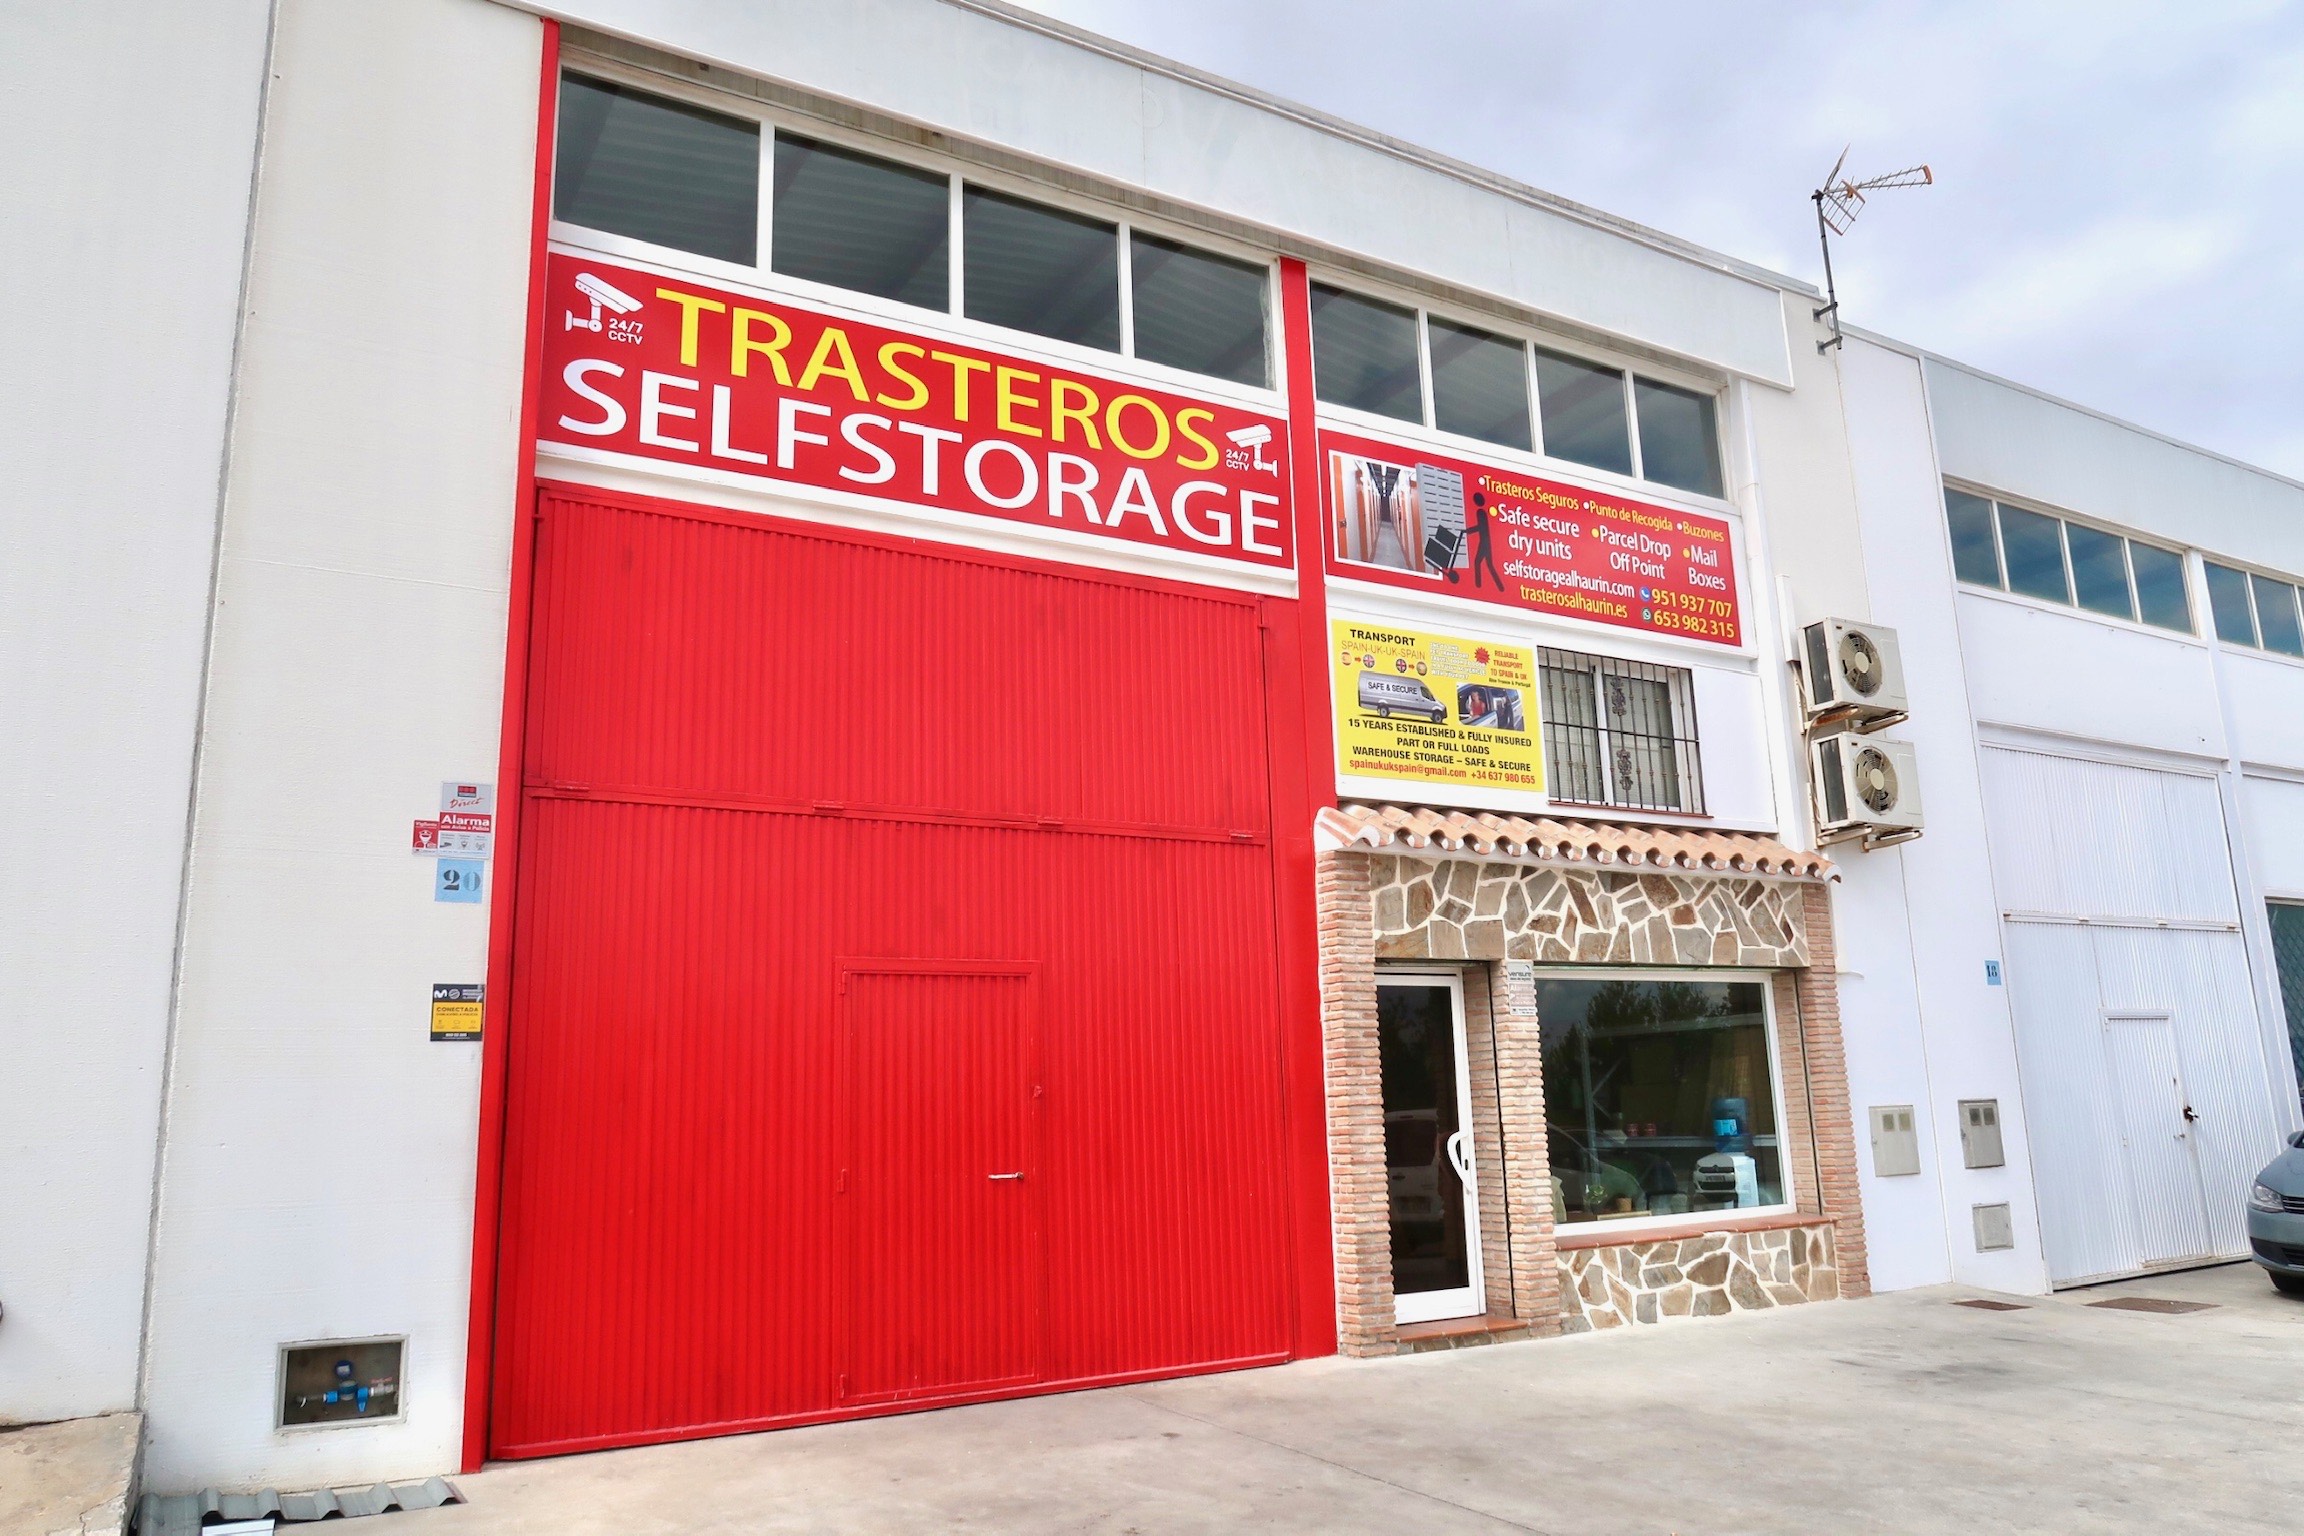 Premises for Self Storage in Alhaurin